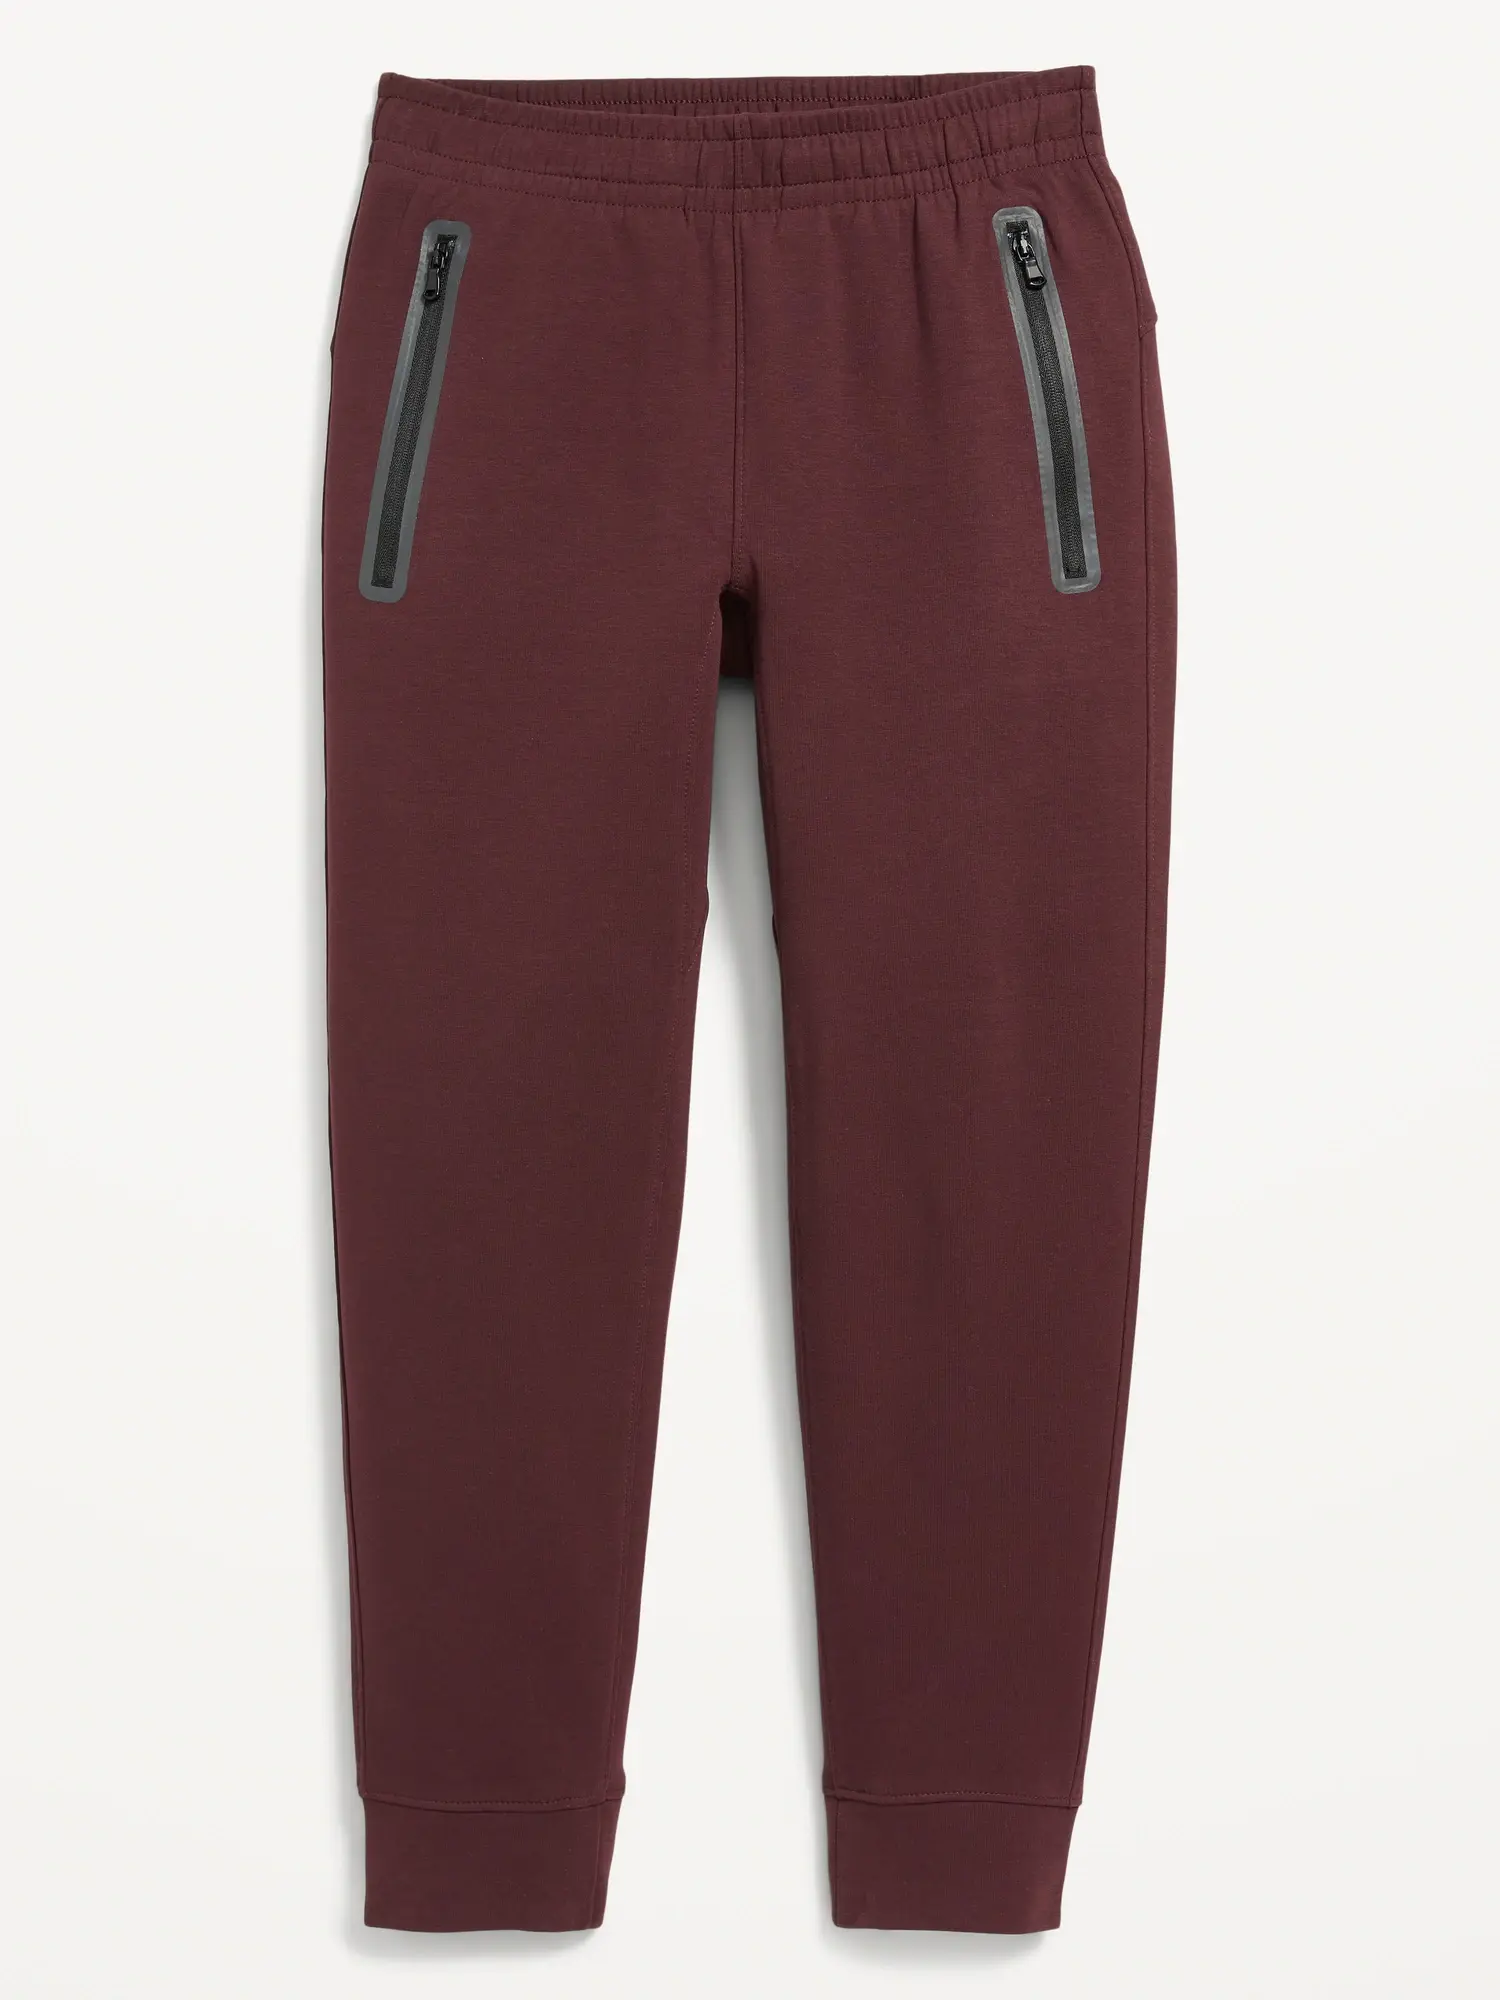 Old Navy Dynamic Fleece Jogger Sweatpants For Boys red - 738677153